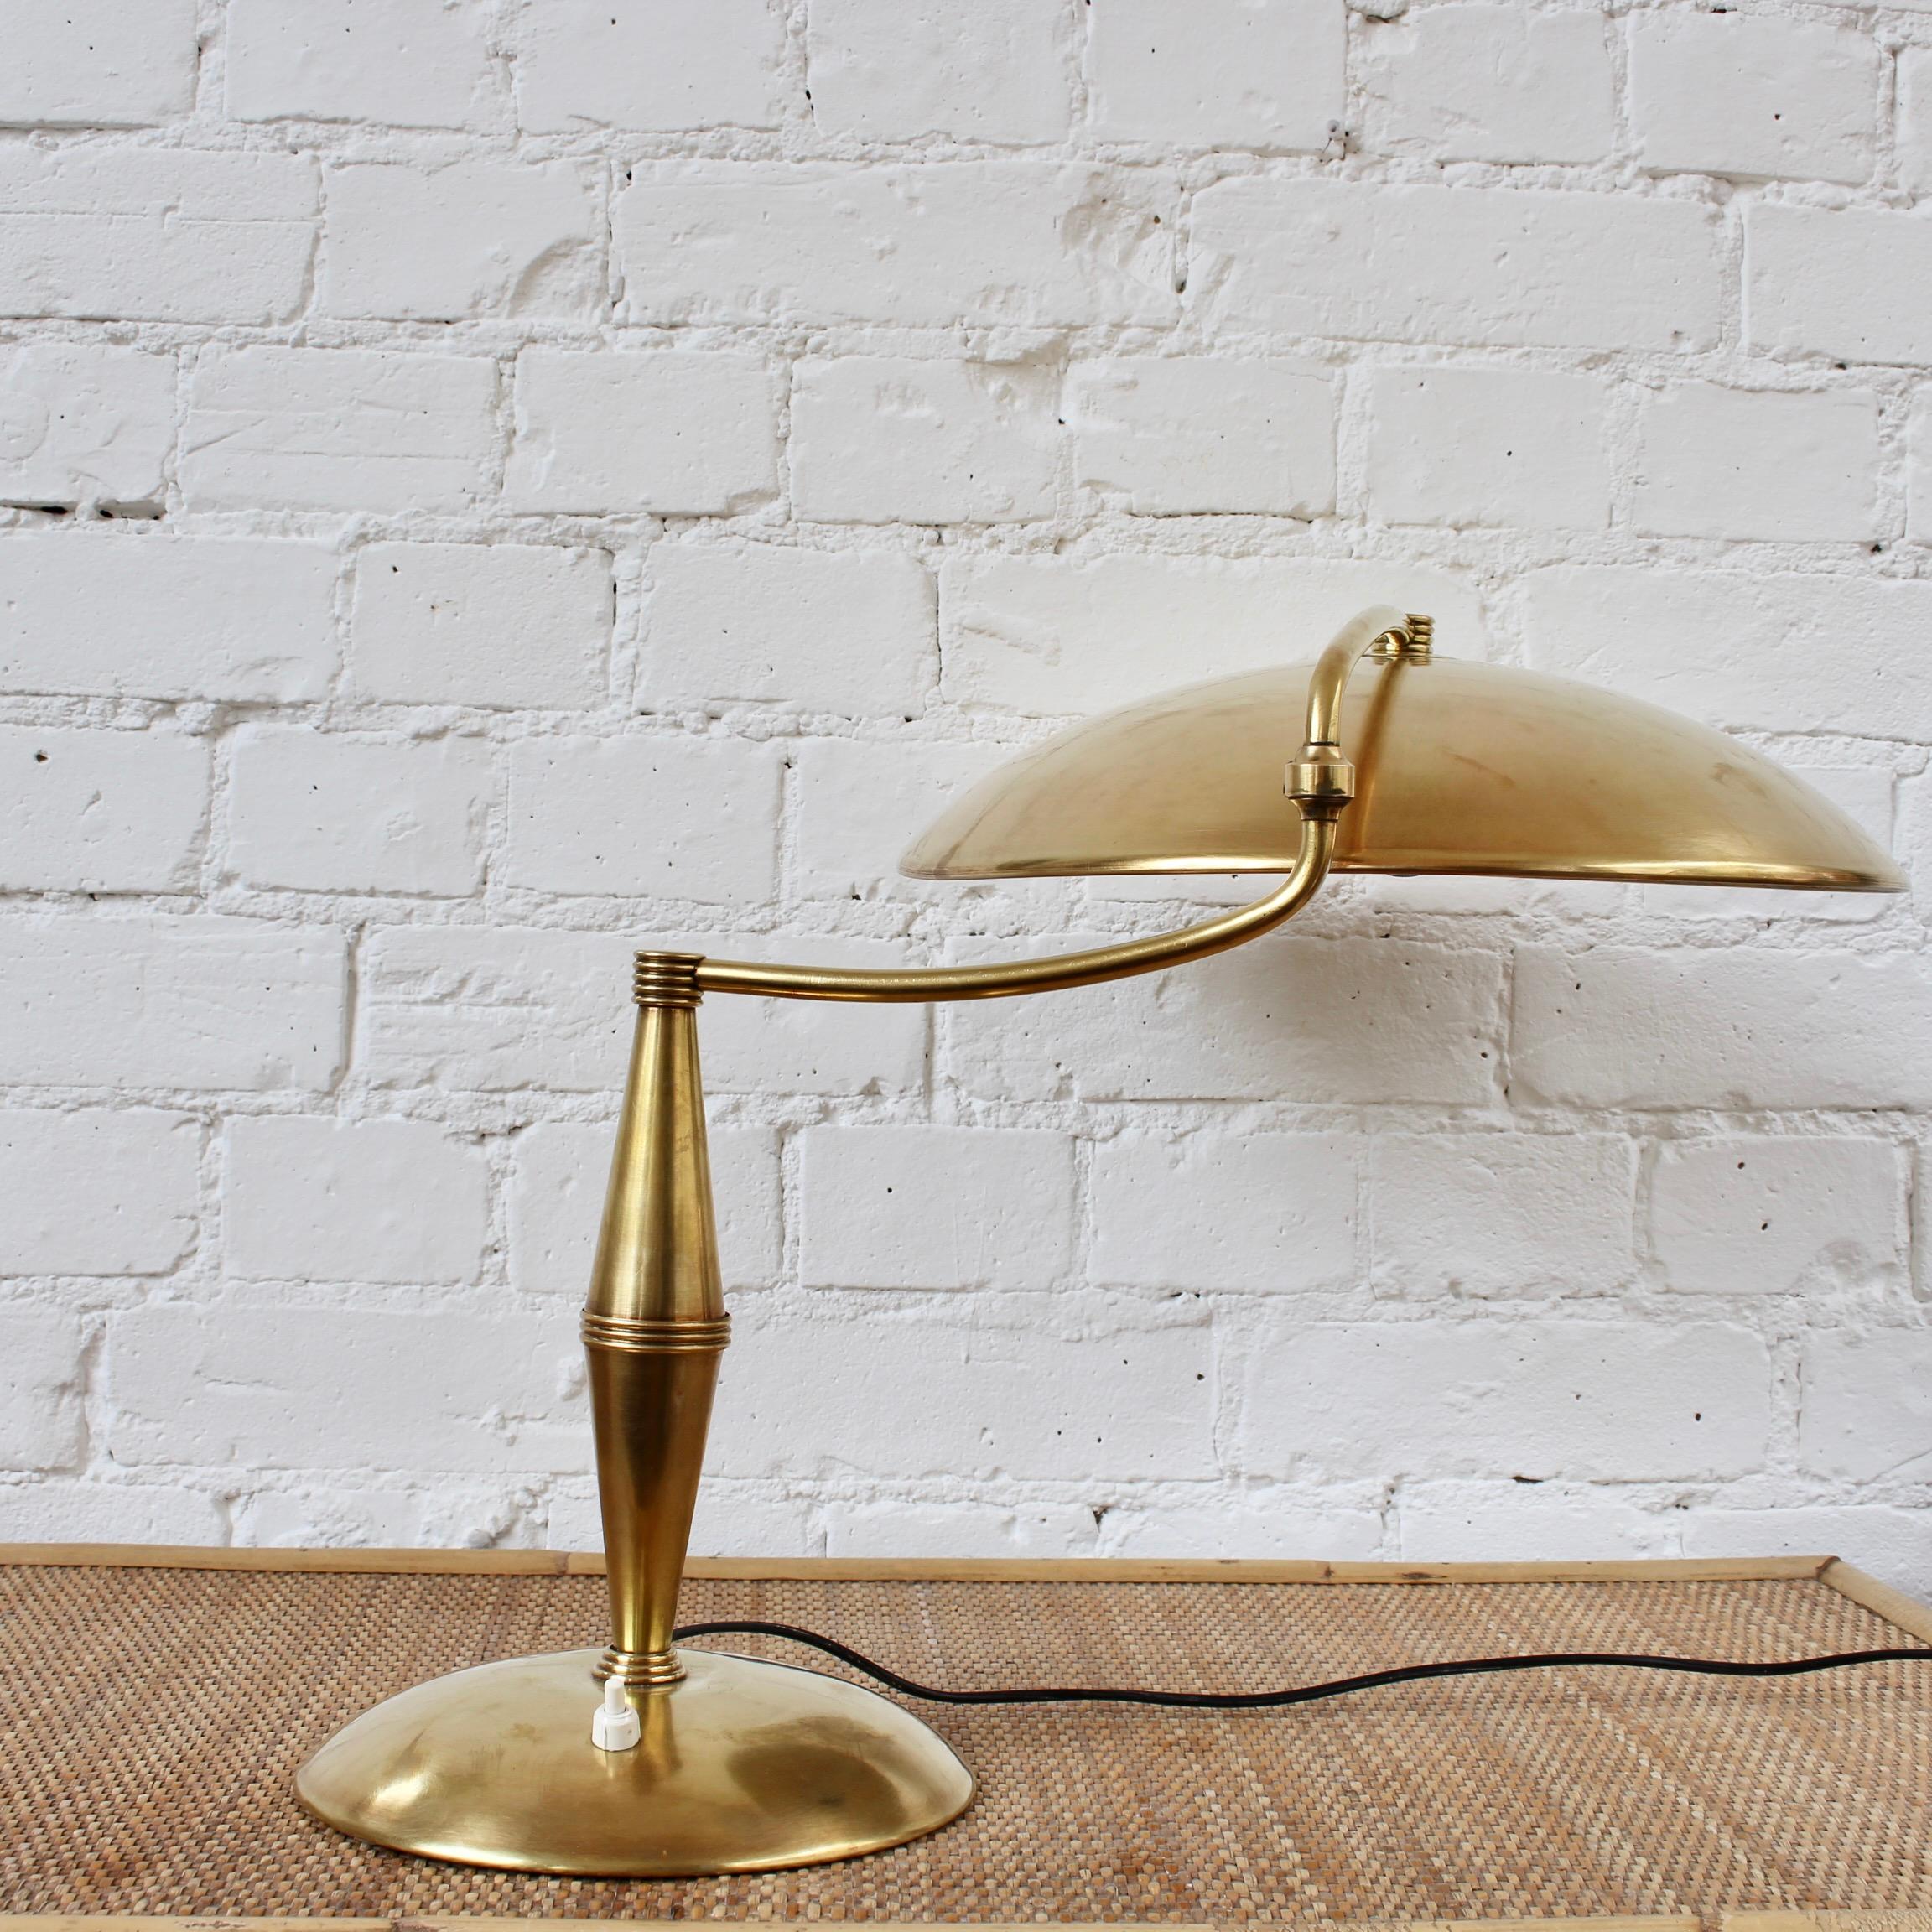 Mid-20th Century Italian Vintage Brass Table Lamp with Swivel Arm 'circa 1950s' For Sale